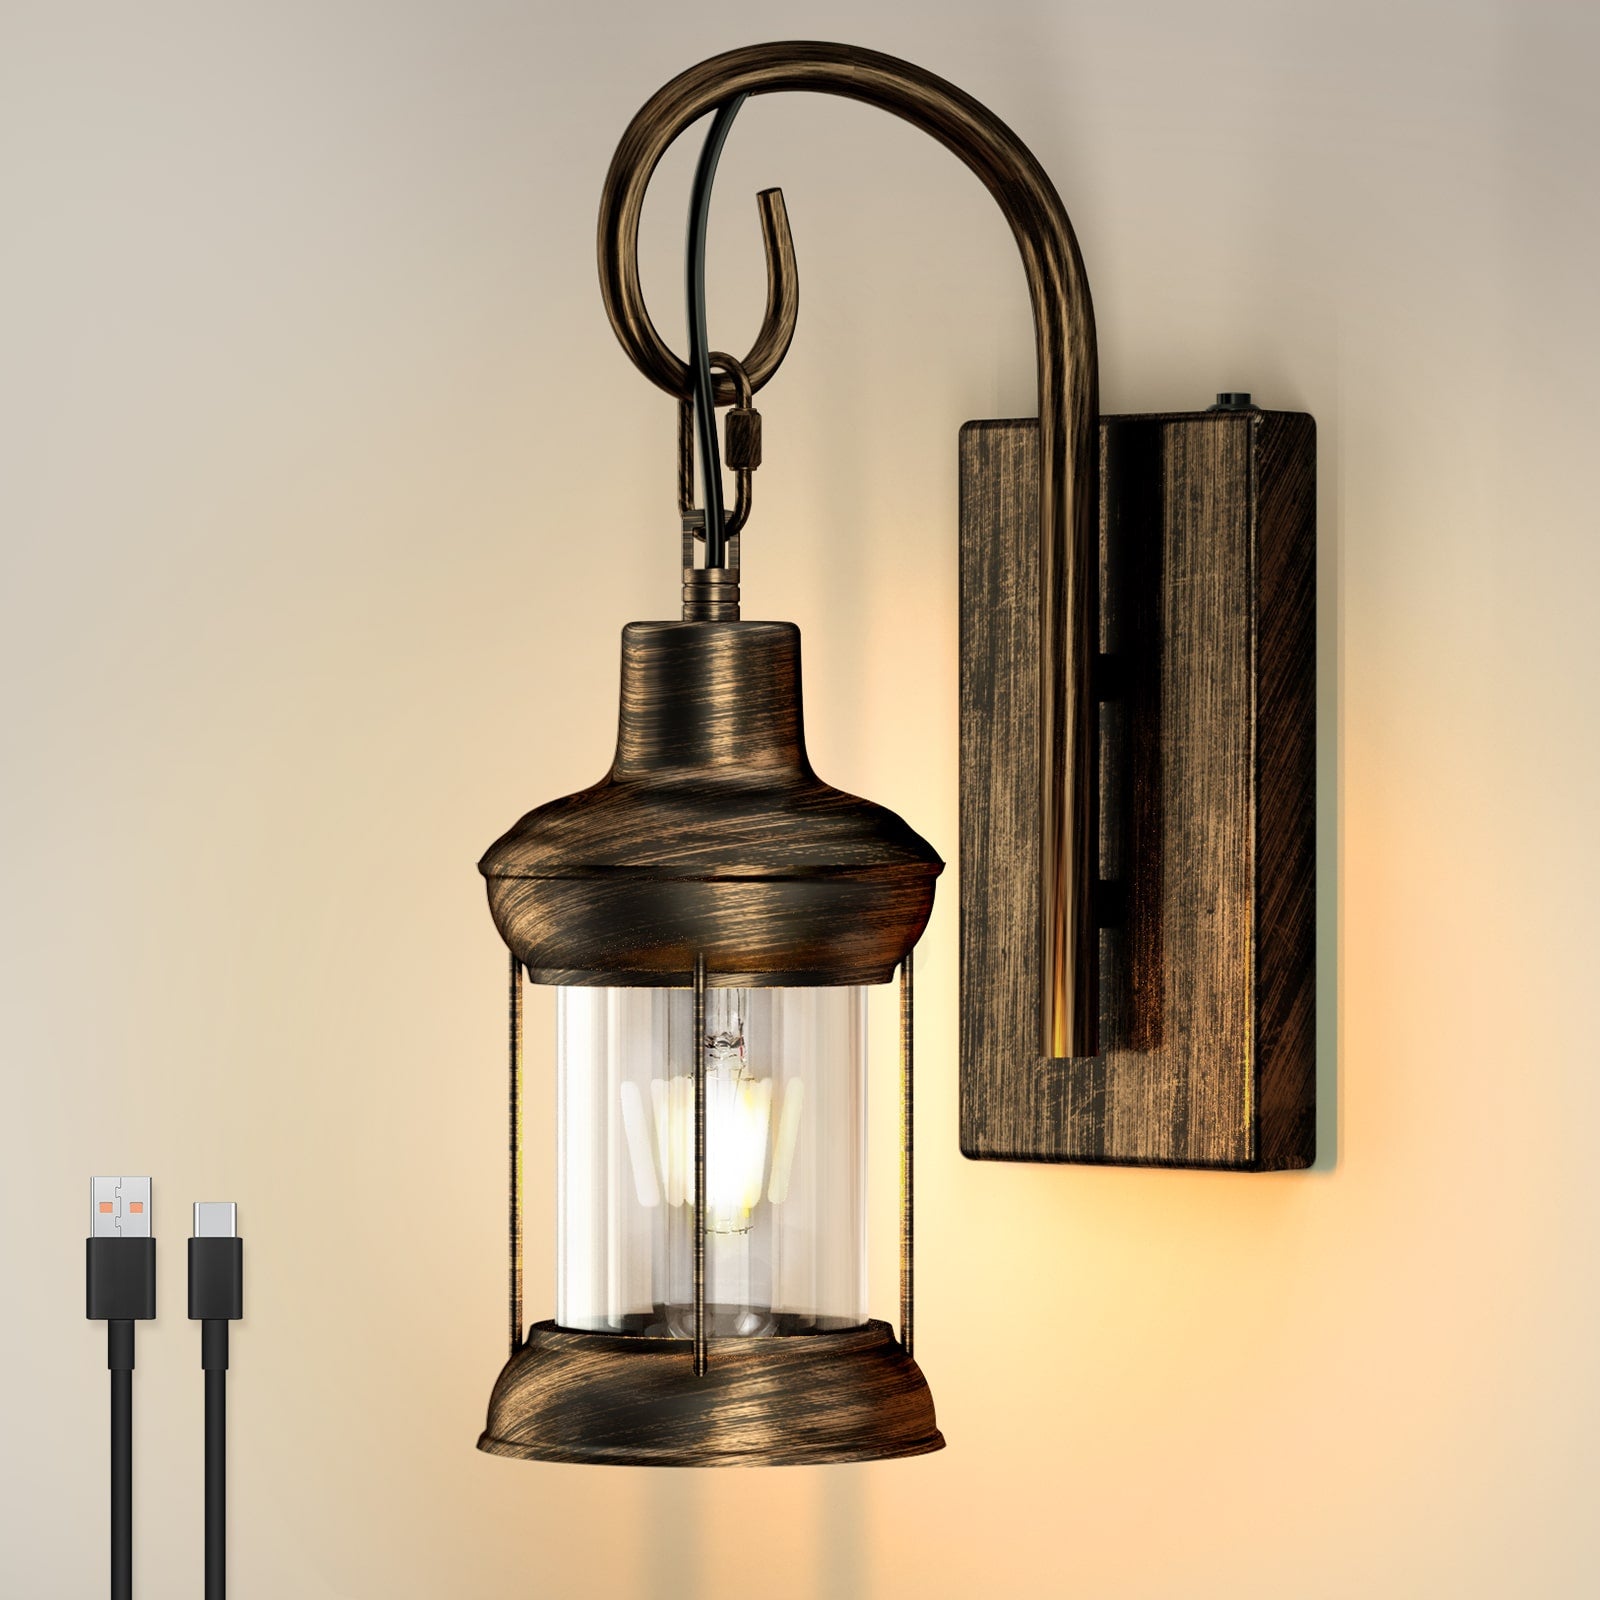 V04 Vintage Rustic Battery Operated Wall Sconce with Oil Rubbed Bronze Finish Cordless for Bedroom Living Room Cafe(Bulb Included)